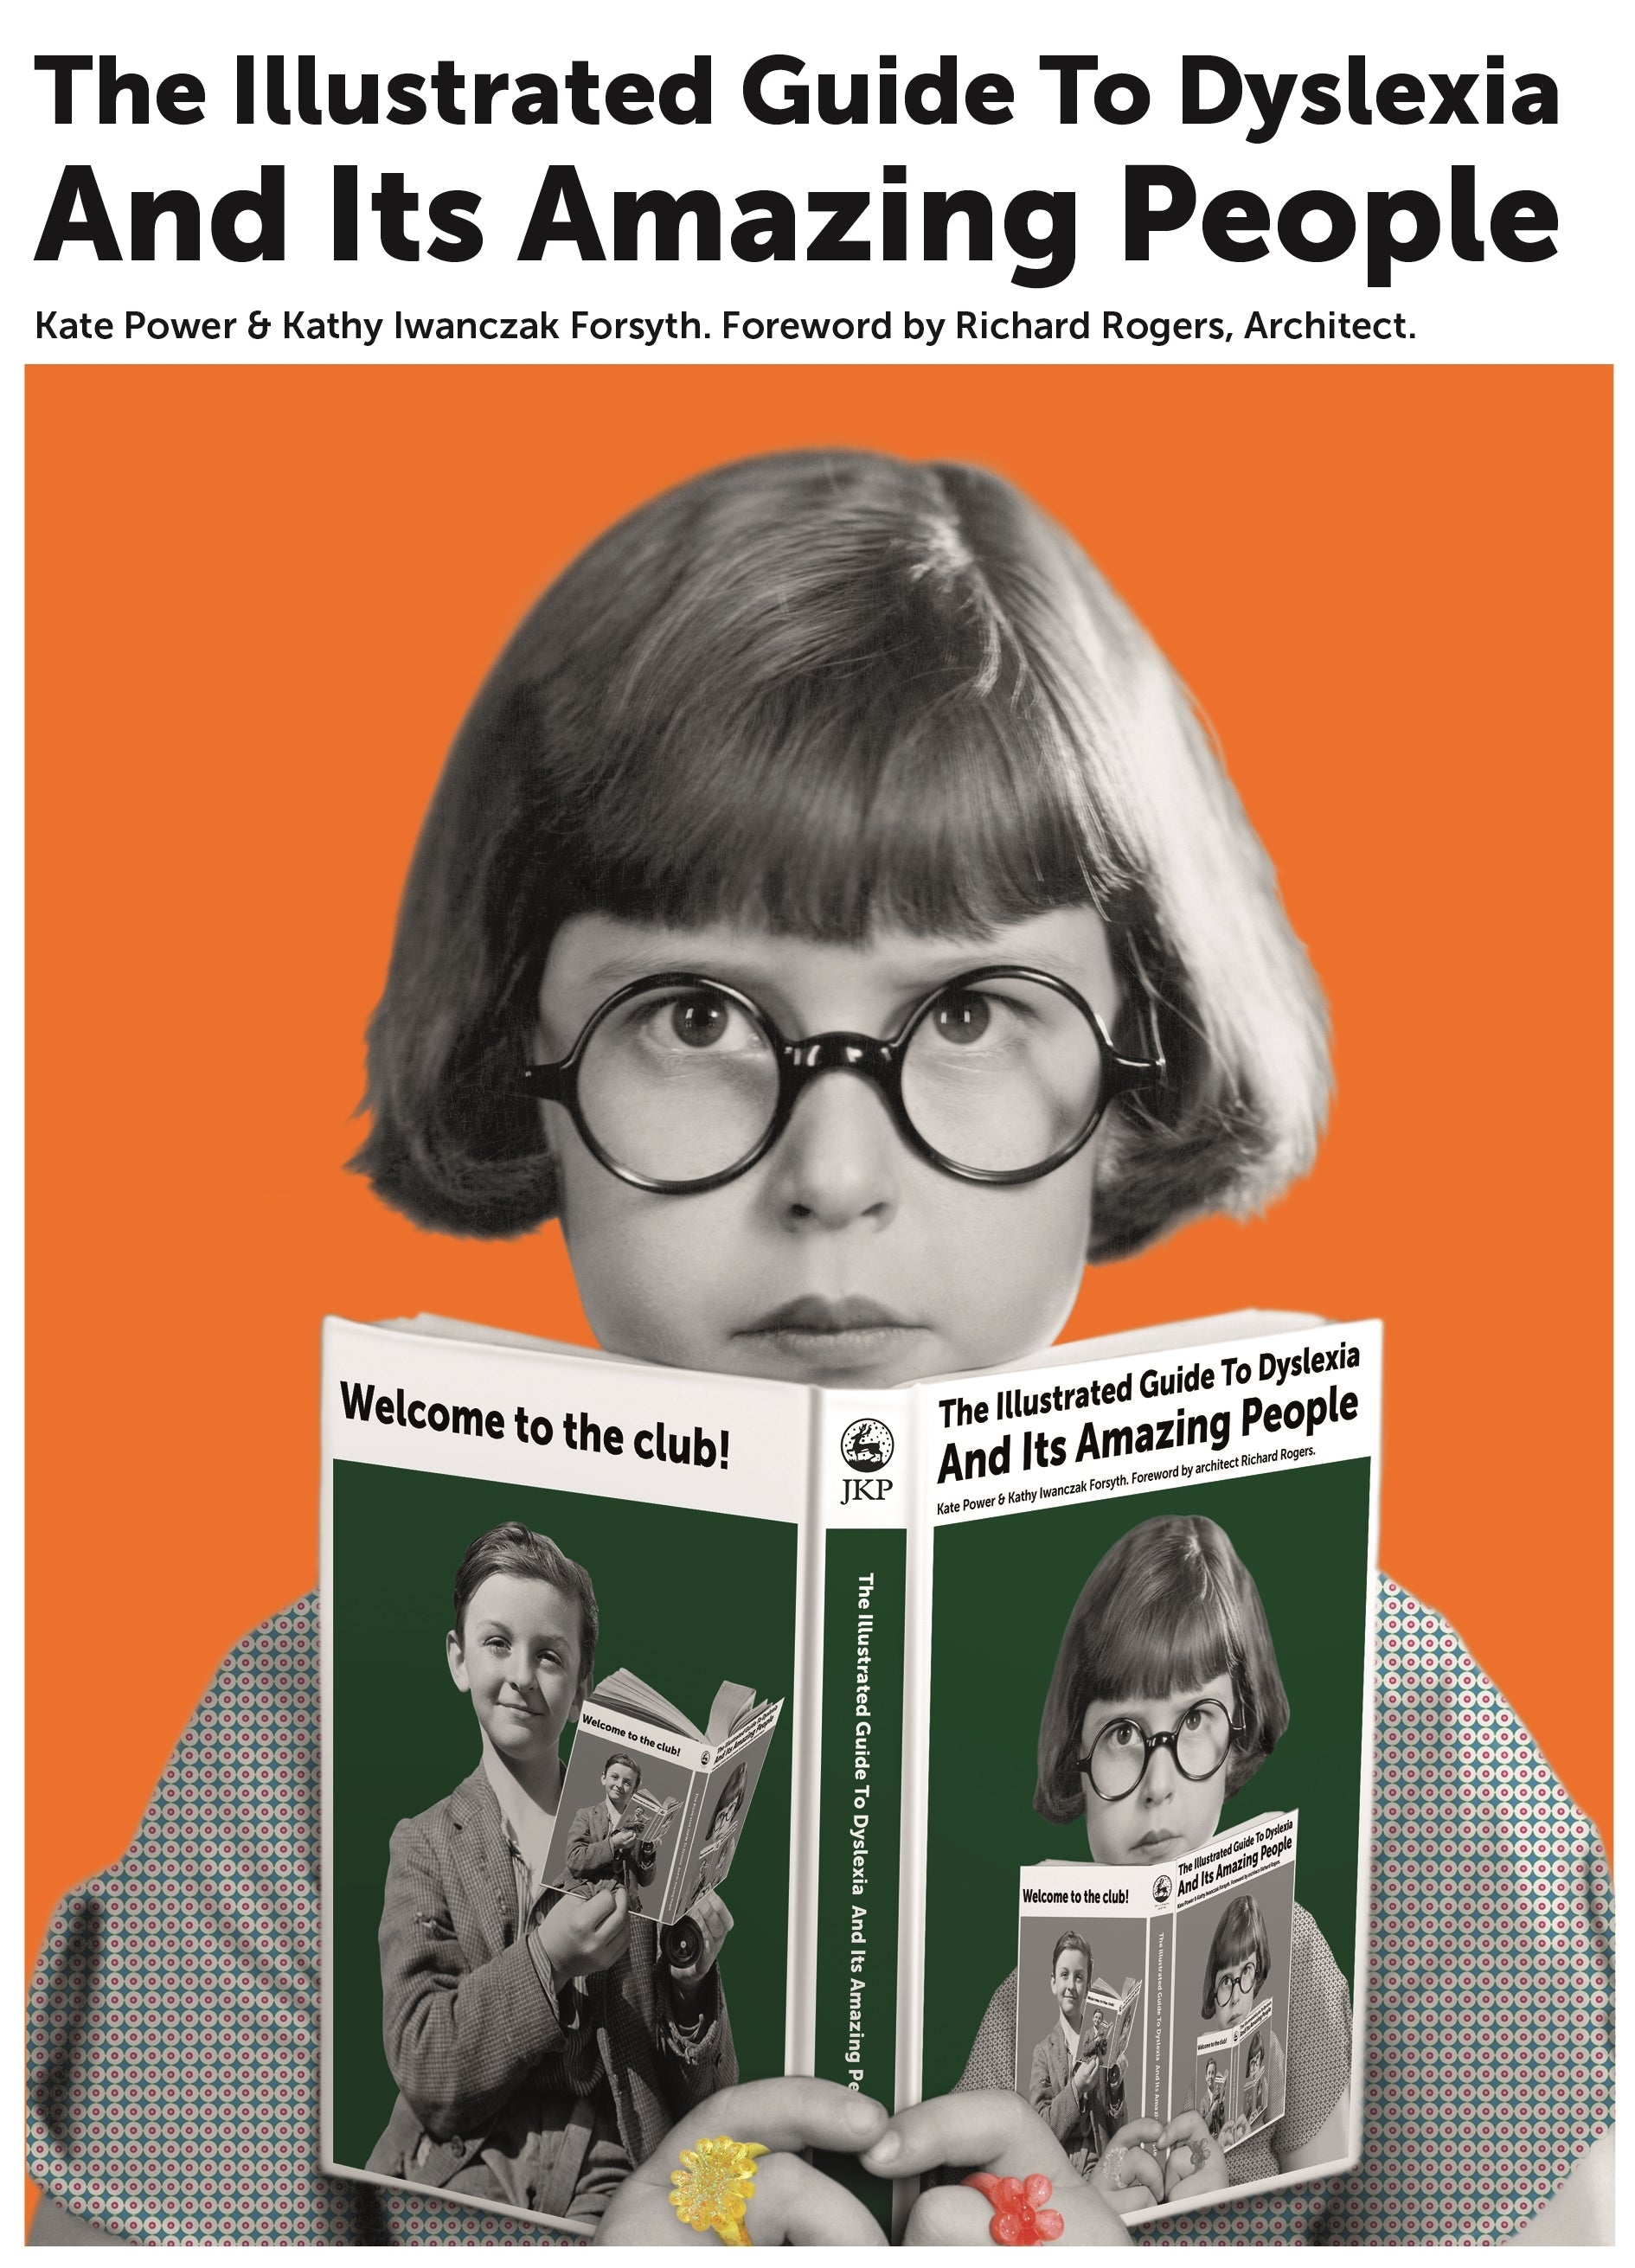 The Illustrated Guide to Dyslexia and Its Amazing People by Kate Power, Kathy Iwanczak Forsyth, Richard Rogers